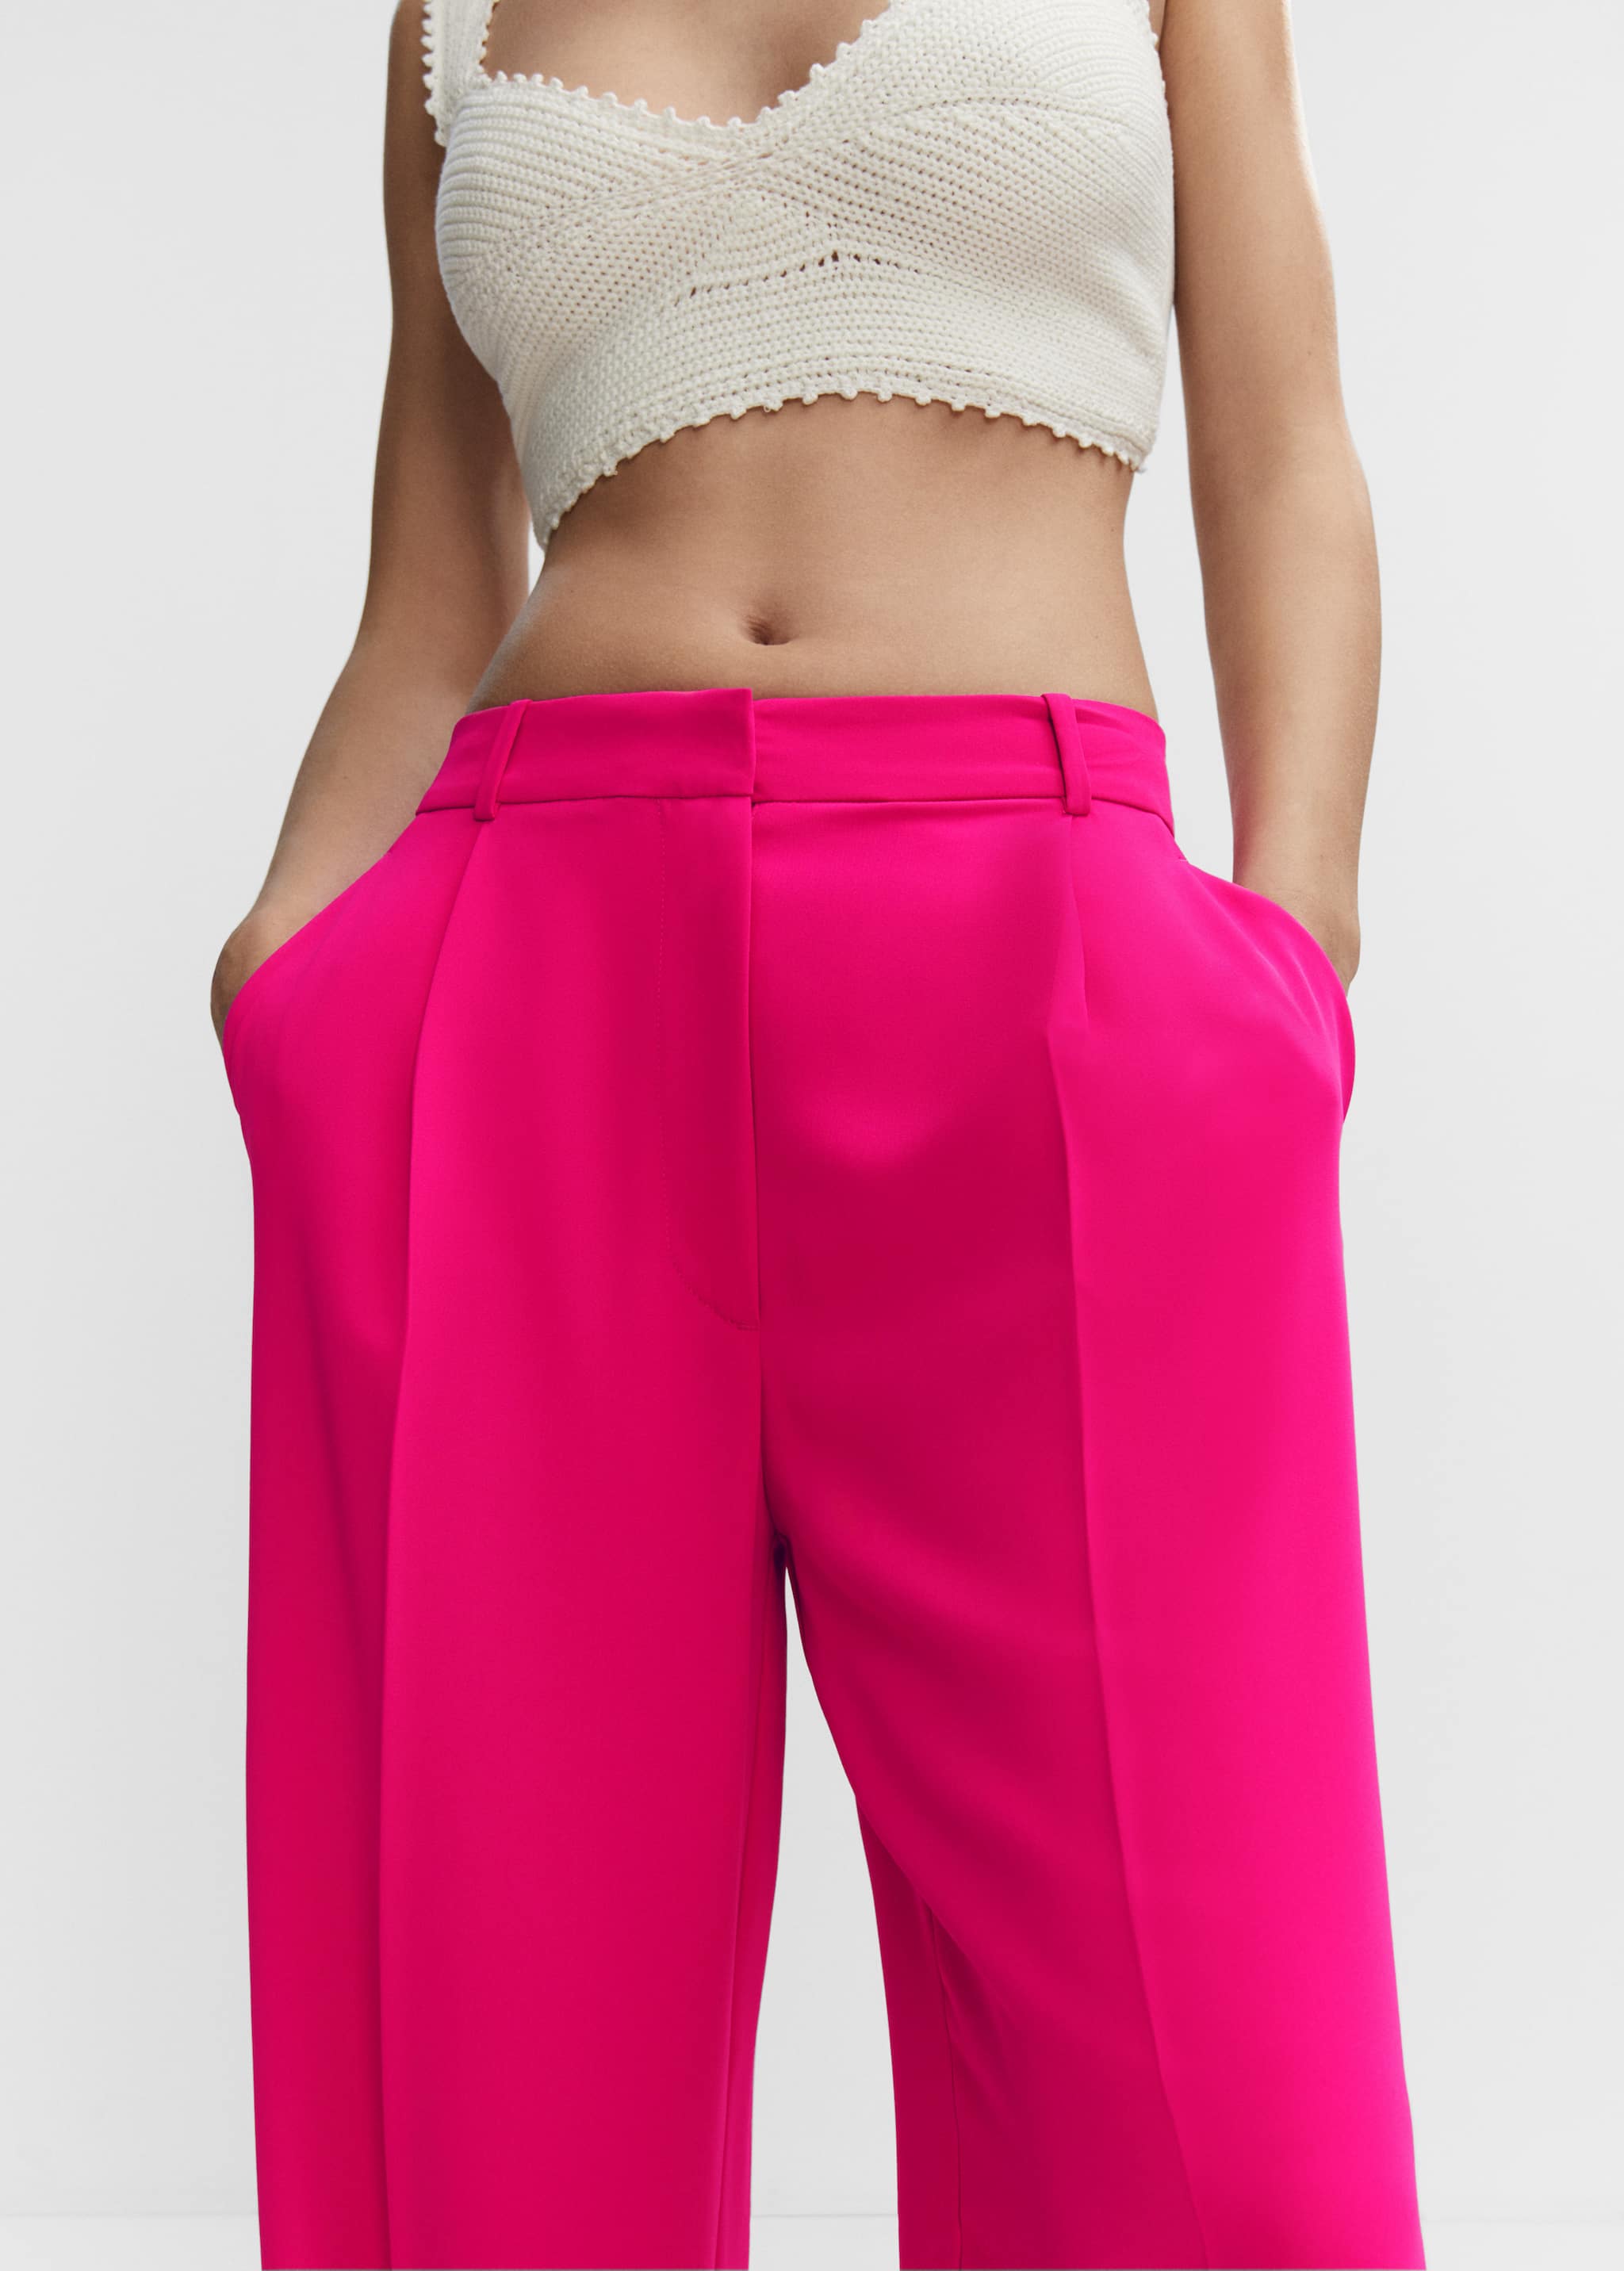 Dart palazzo trousers - Details of the article 1